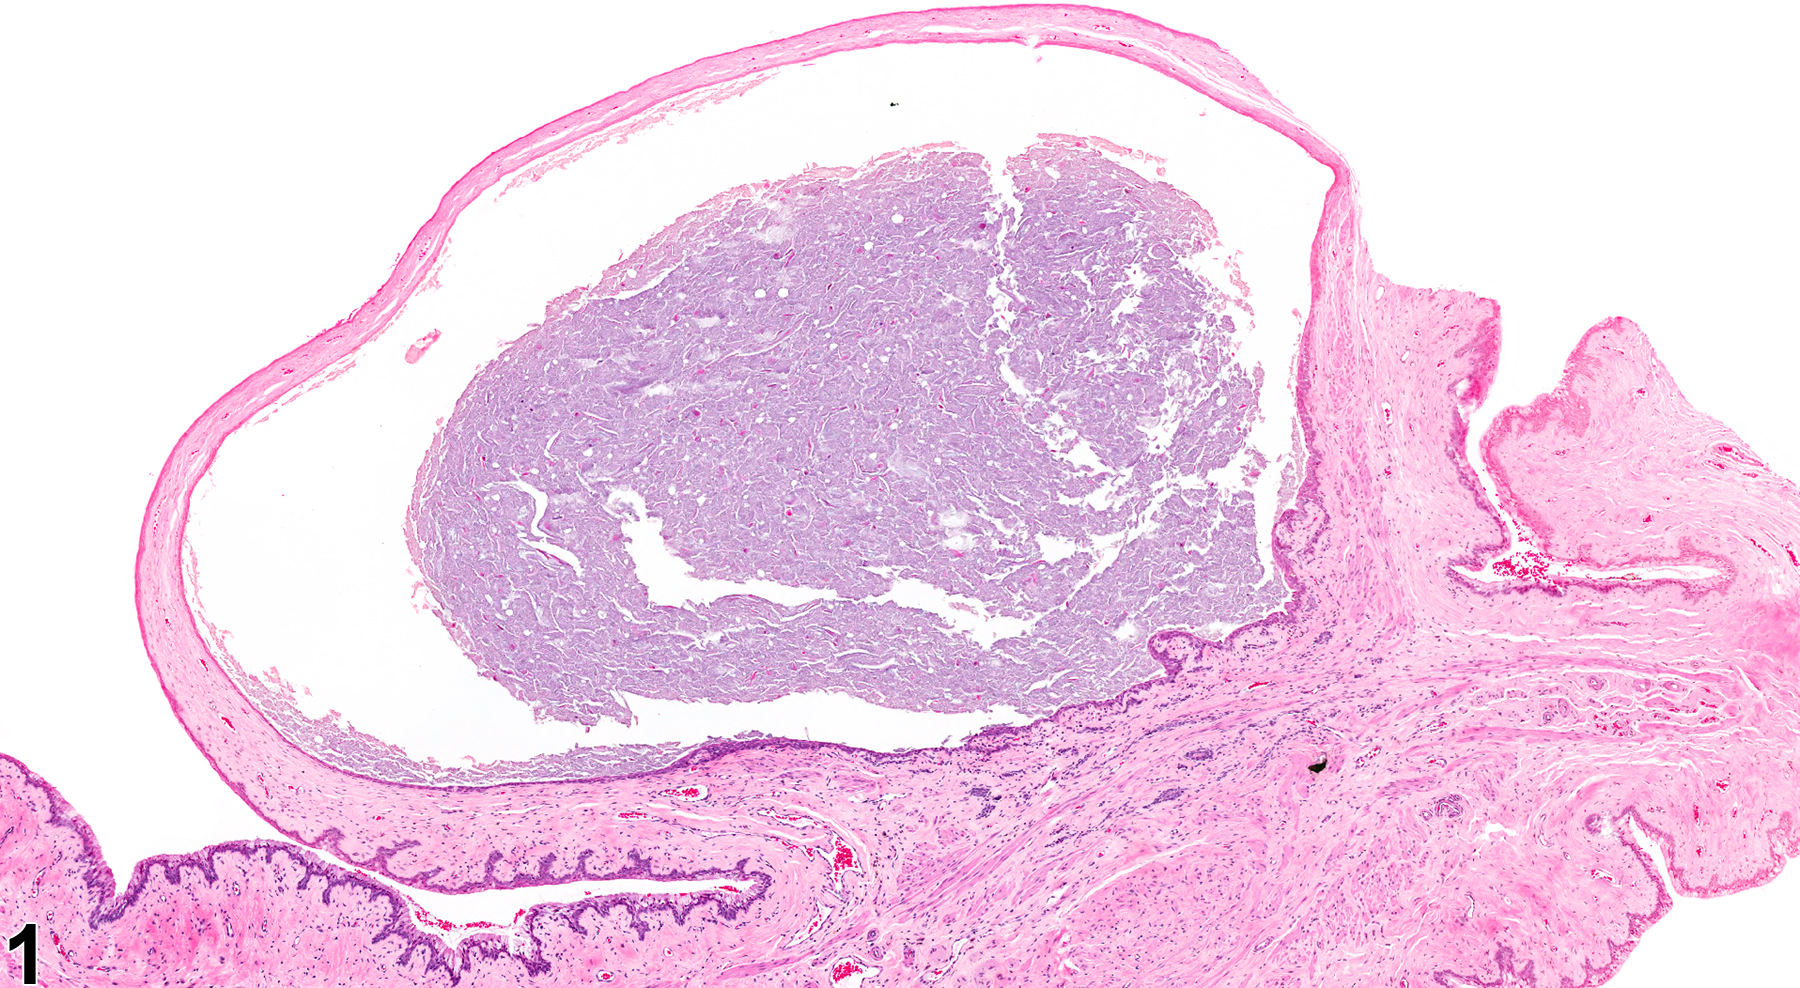 Image of cyst in the vagina from a female F344/N rat in a chronic study